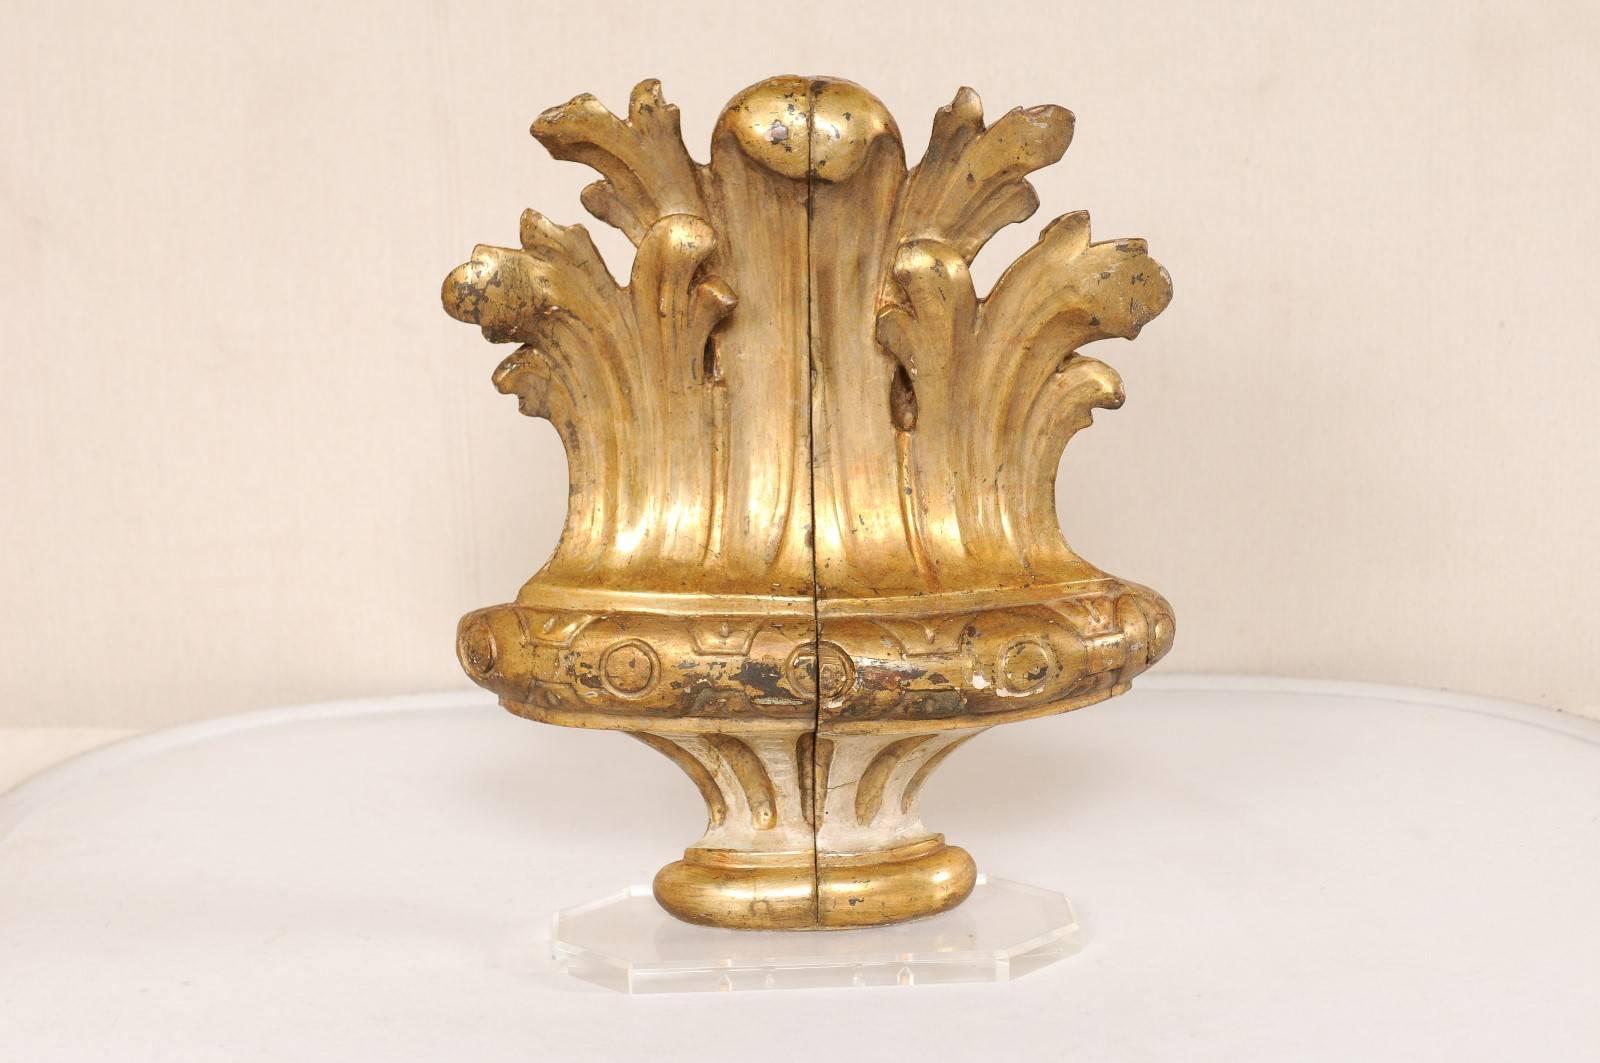 An early 19th century Italian carved wood gilded fragment on custom base. This Italian hand-carved fragment features an urn shaped body, decorated in circular patterns and fluting details, with acanthus leafs raising from its top. This fragment has